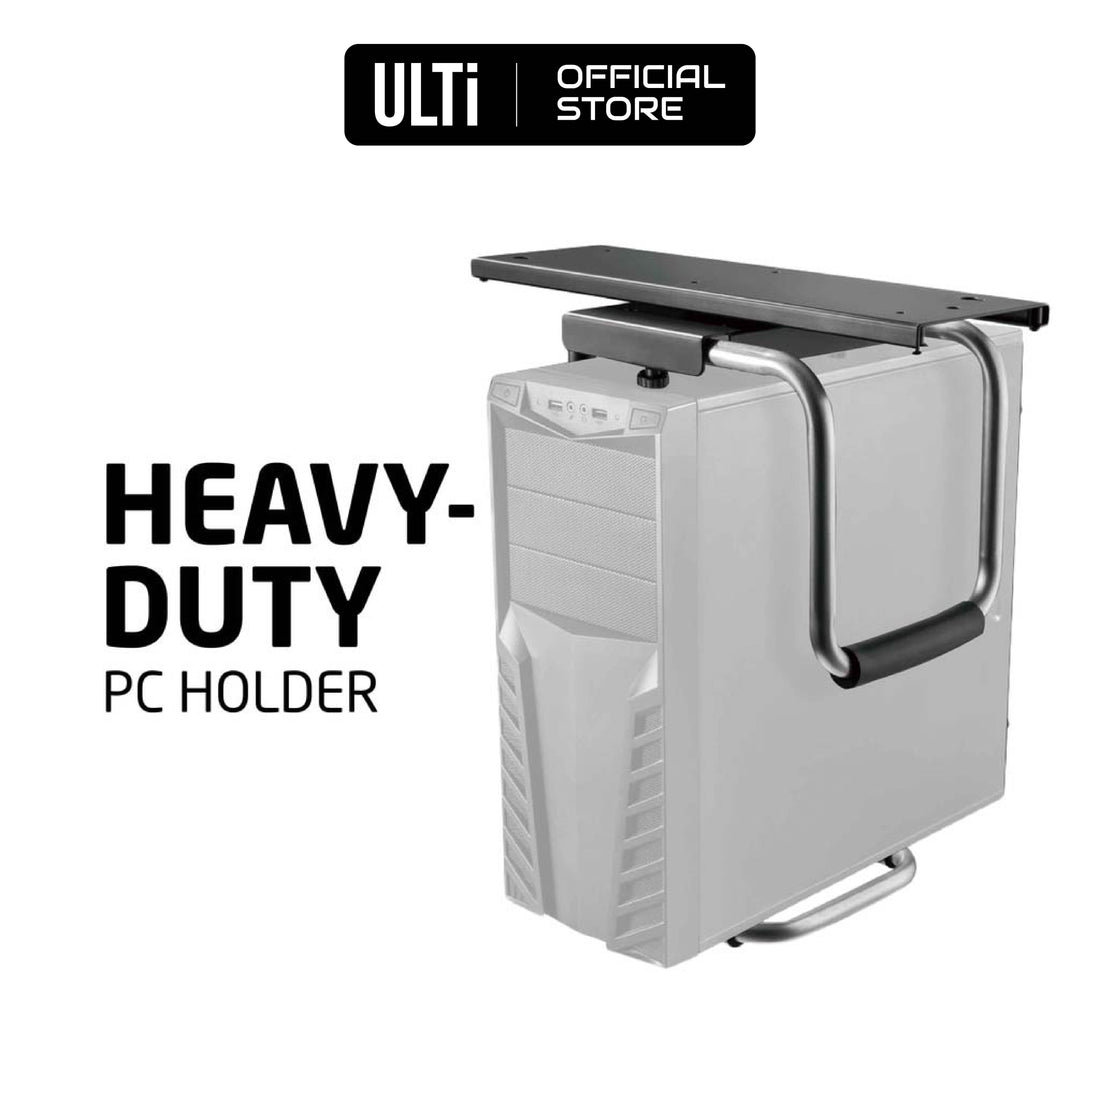 ULTi Heavy-duty PC Holder Case with Sliding Track, Under-desk Installation, 360° Swivel & 30kg Weight Load Capacity